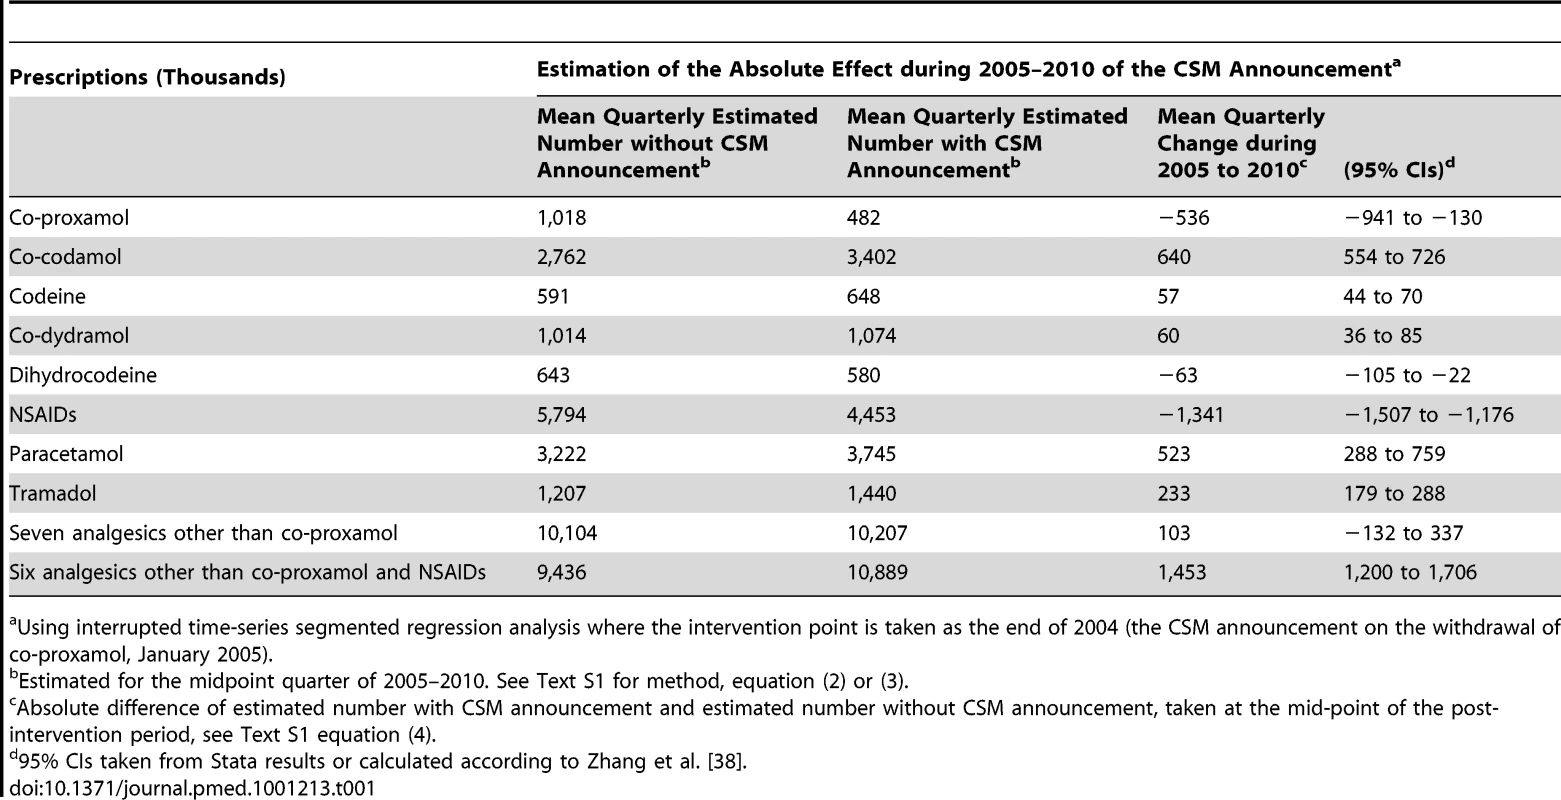 Changes in prescriptions involving co-proxamol and seven other analgesics in England and Wales, 1998–2010, associated with the Committee on Safety of Medicines (CSM) announcement in January 2005.